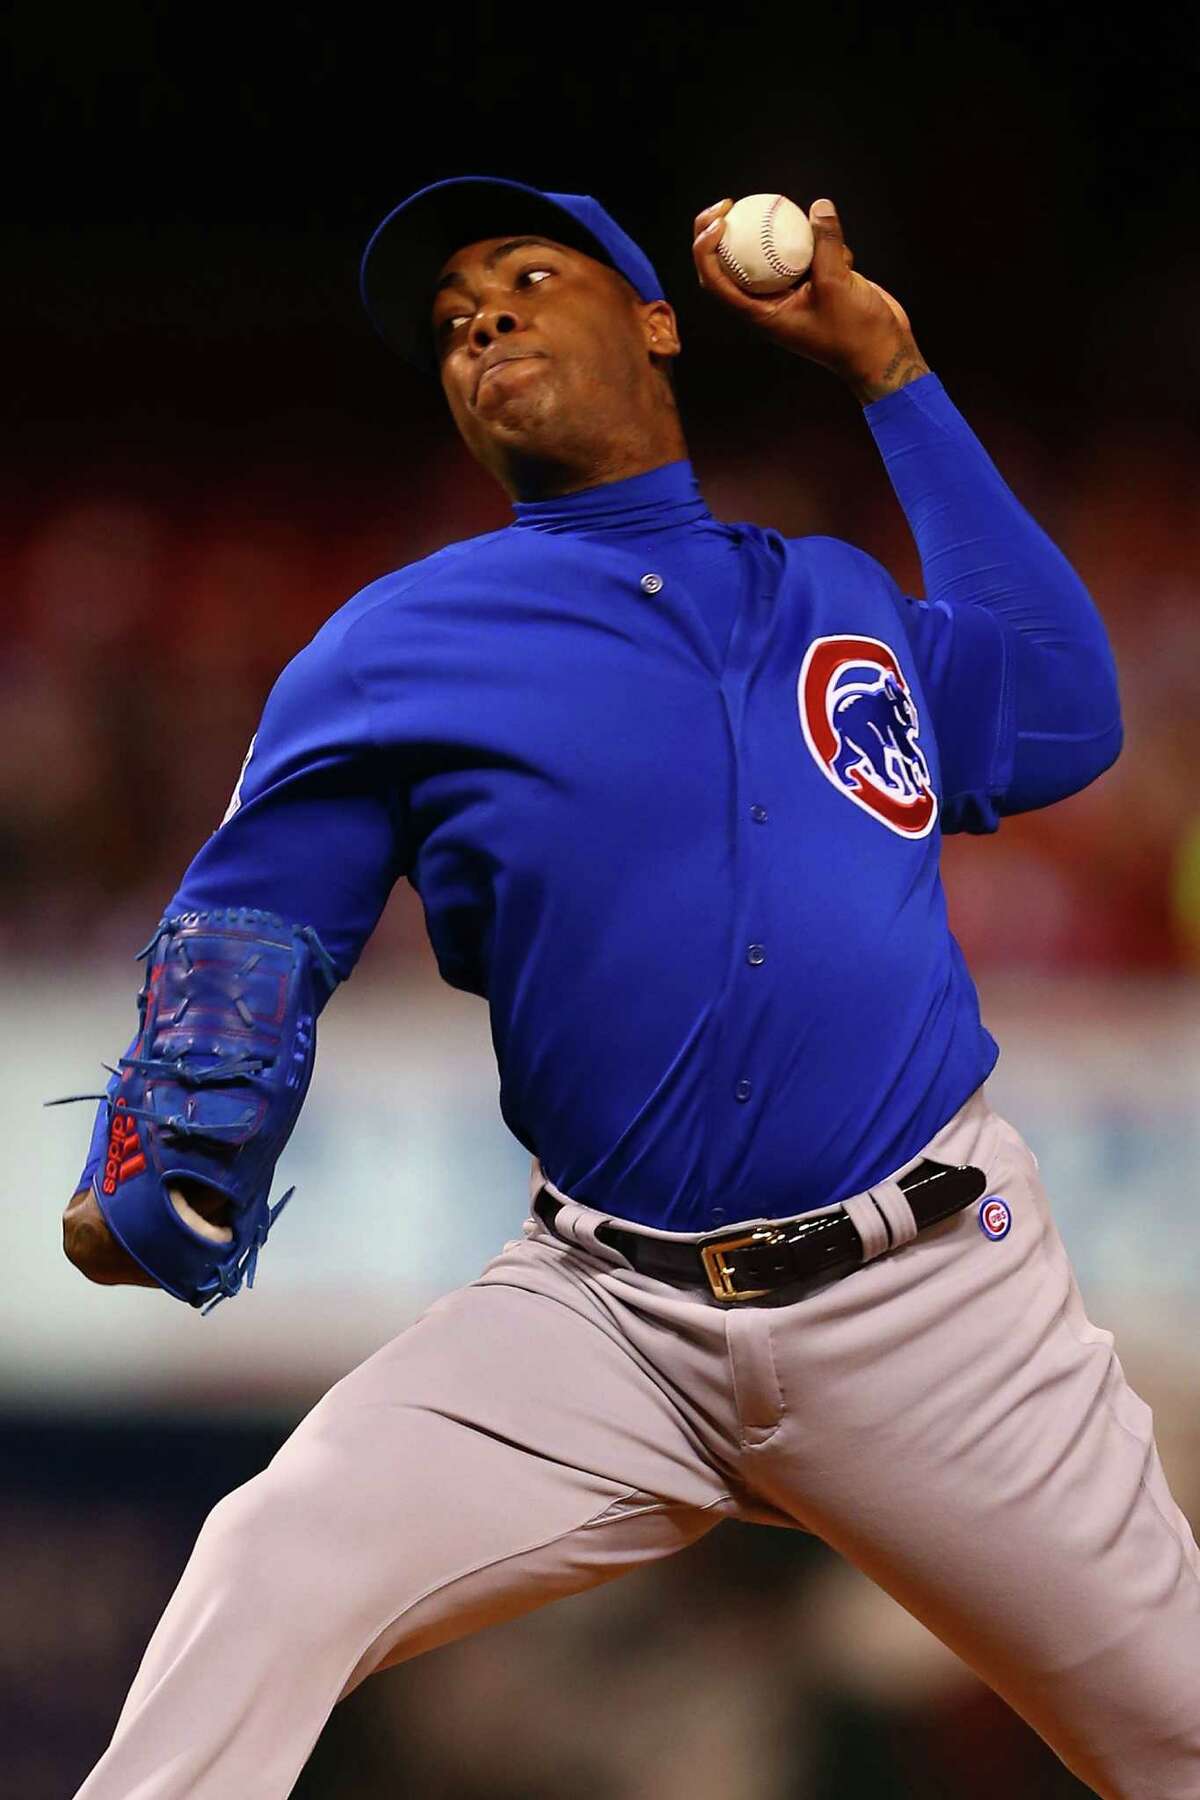 Chapman says Cubs used him too much